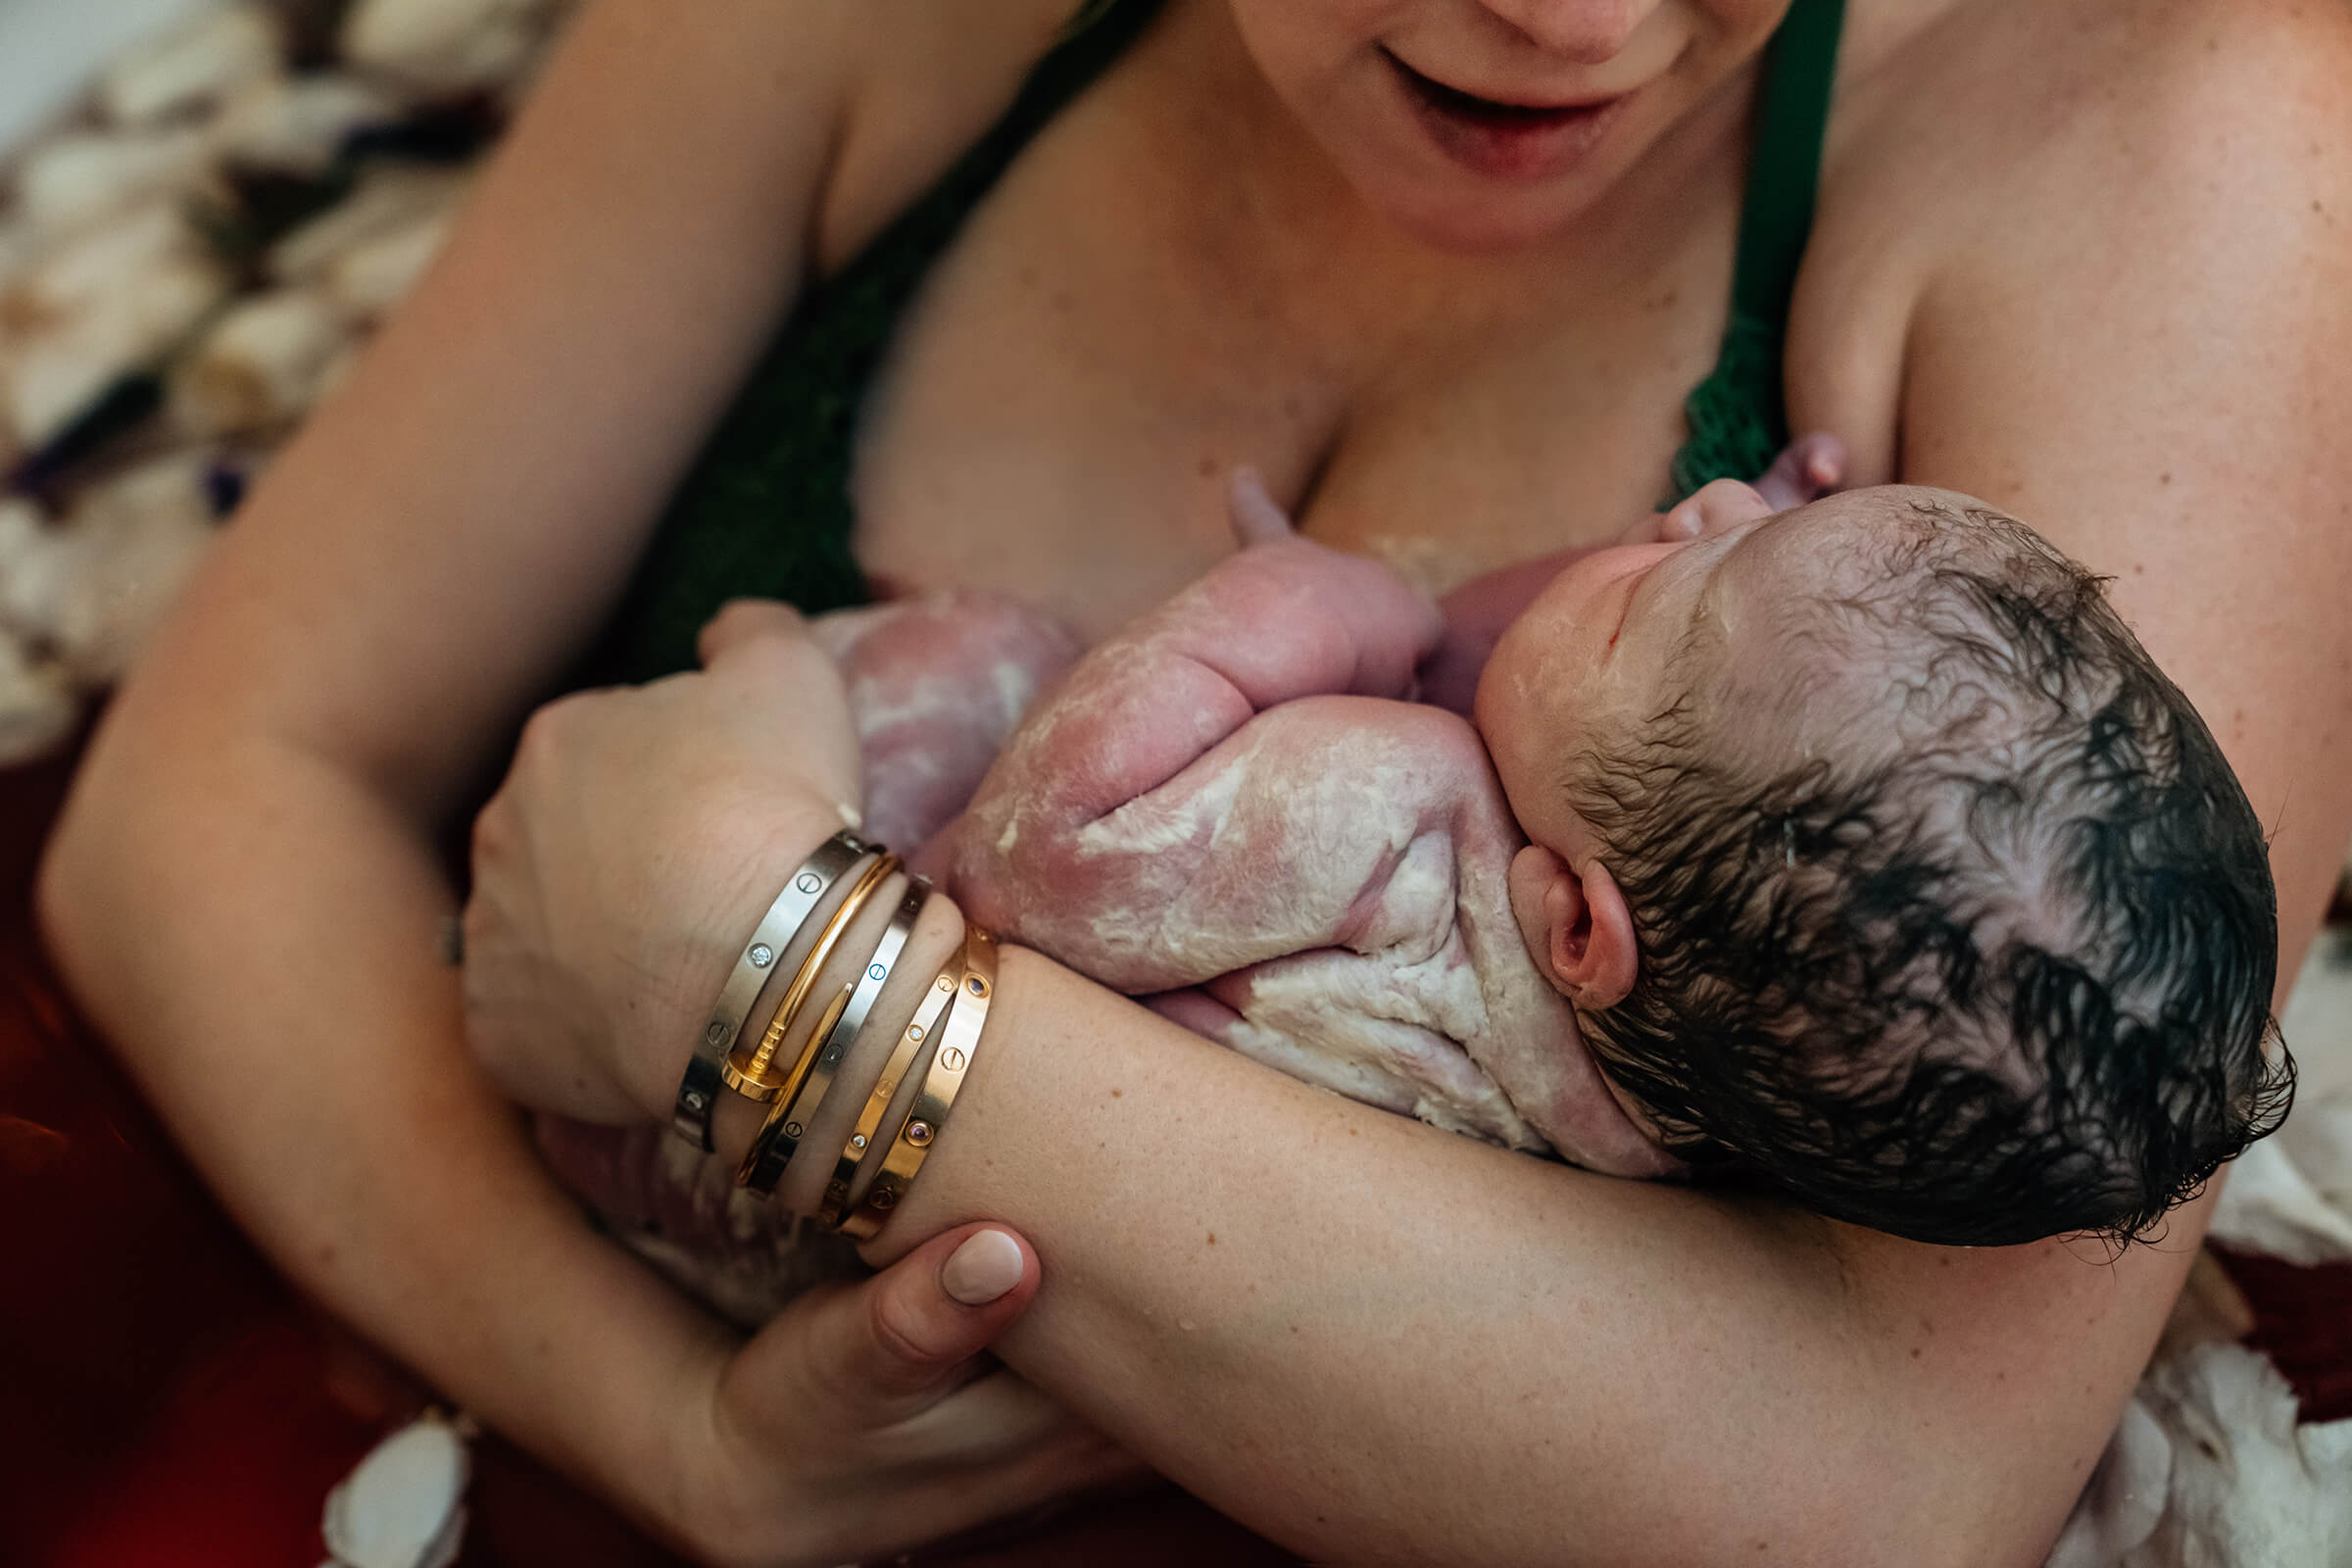 newborn in his mother's arms covered in vernix right after delivery 